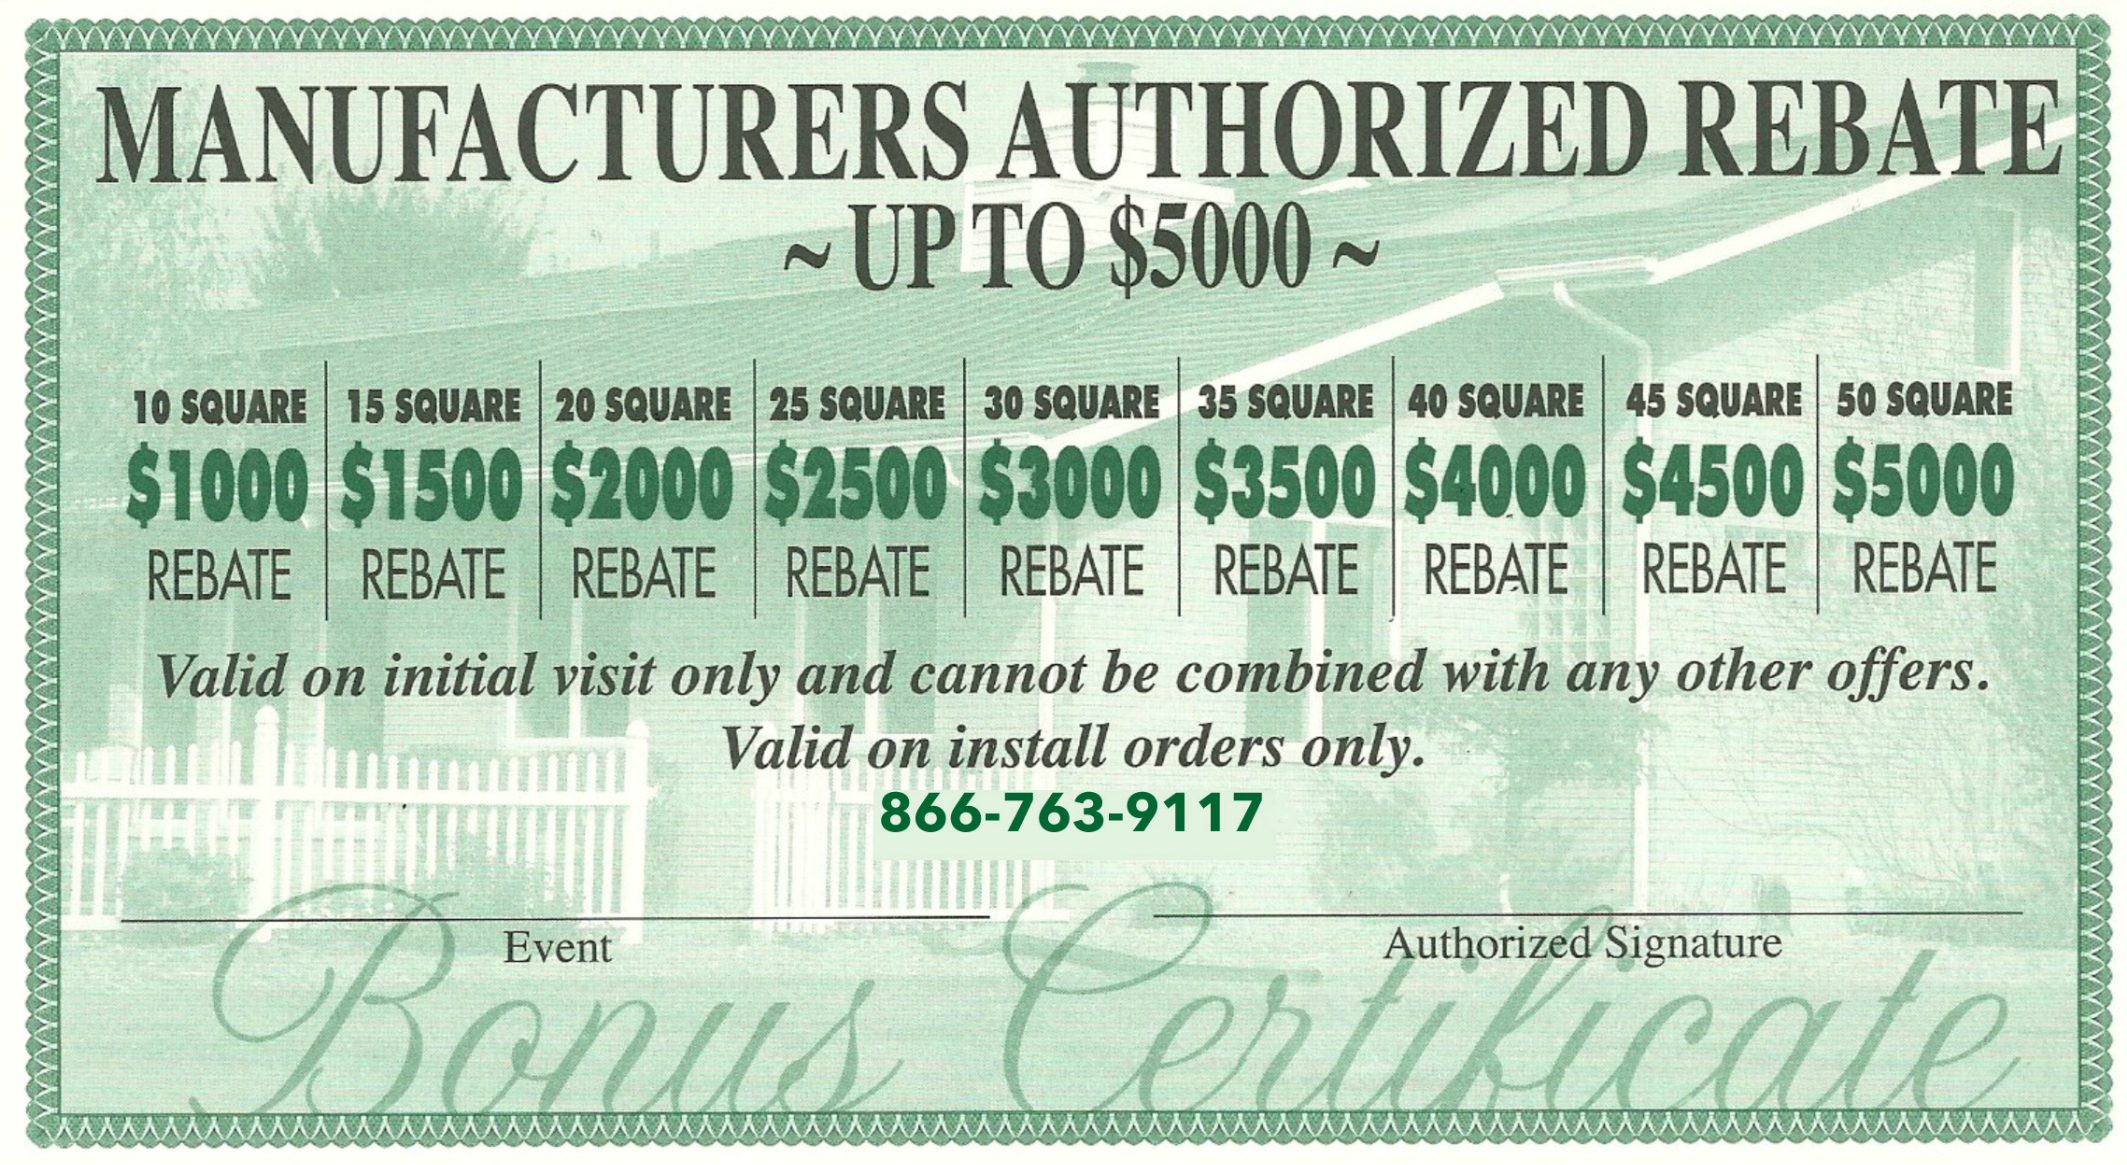 leading-metal-roof-company-announces-5000-manufacturer-s-authorized-roofing-rebate